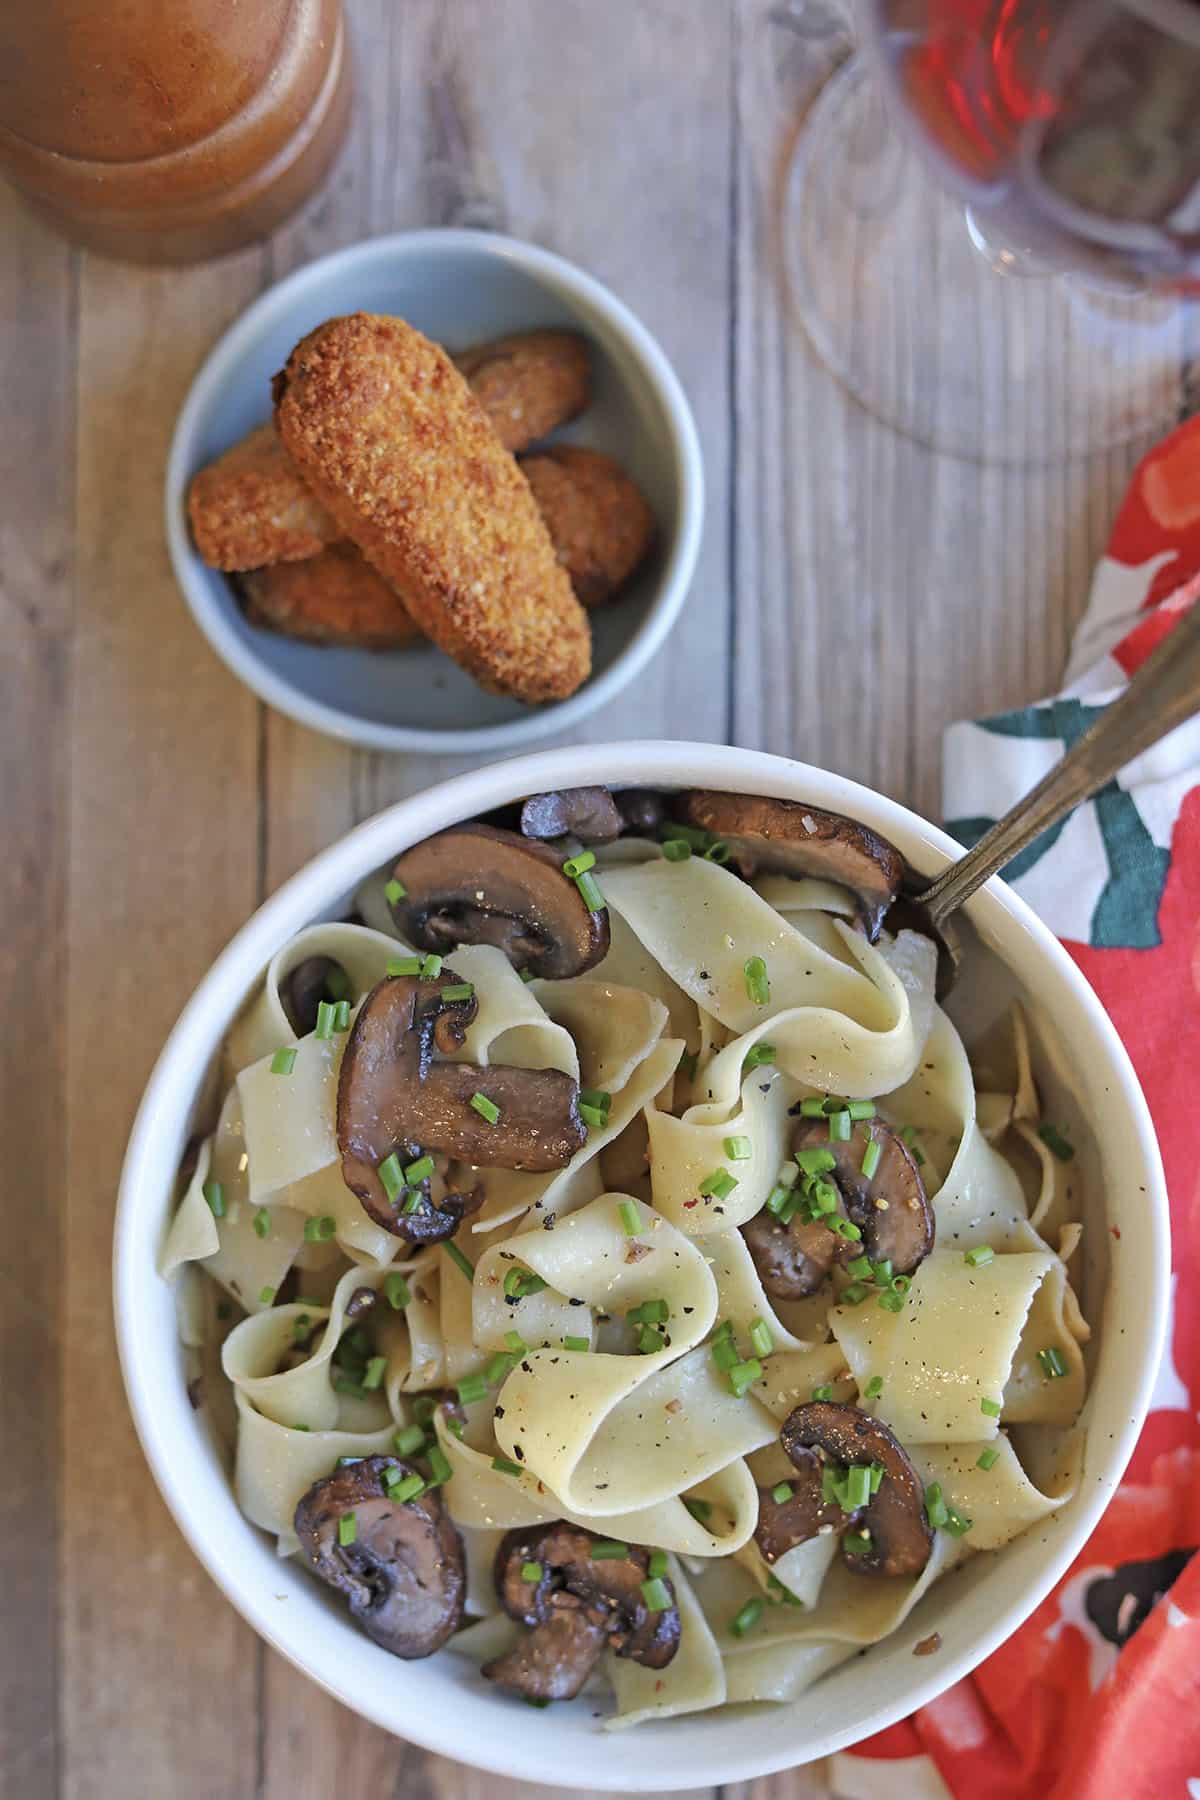 Bowl of vegan pappardelle with mushrooms by vegan chick'n strips.